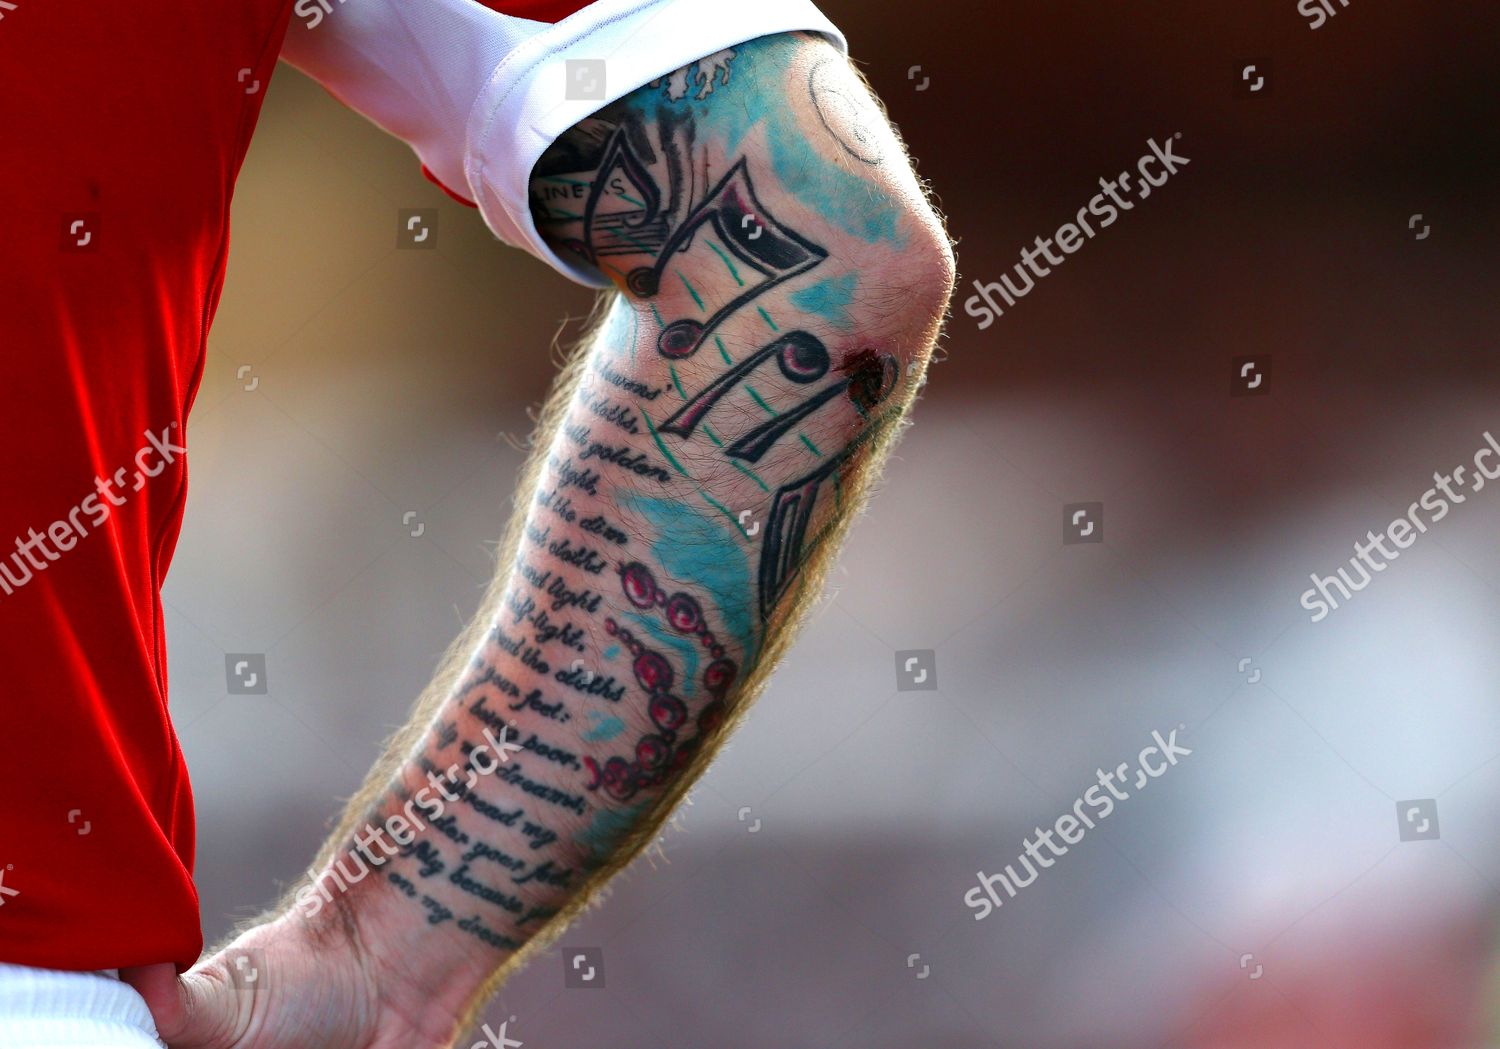 Tattooed Arm Andy Reid Nottingham Forest Editorial Stock Photo Stock Image Shutterstock